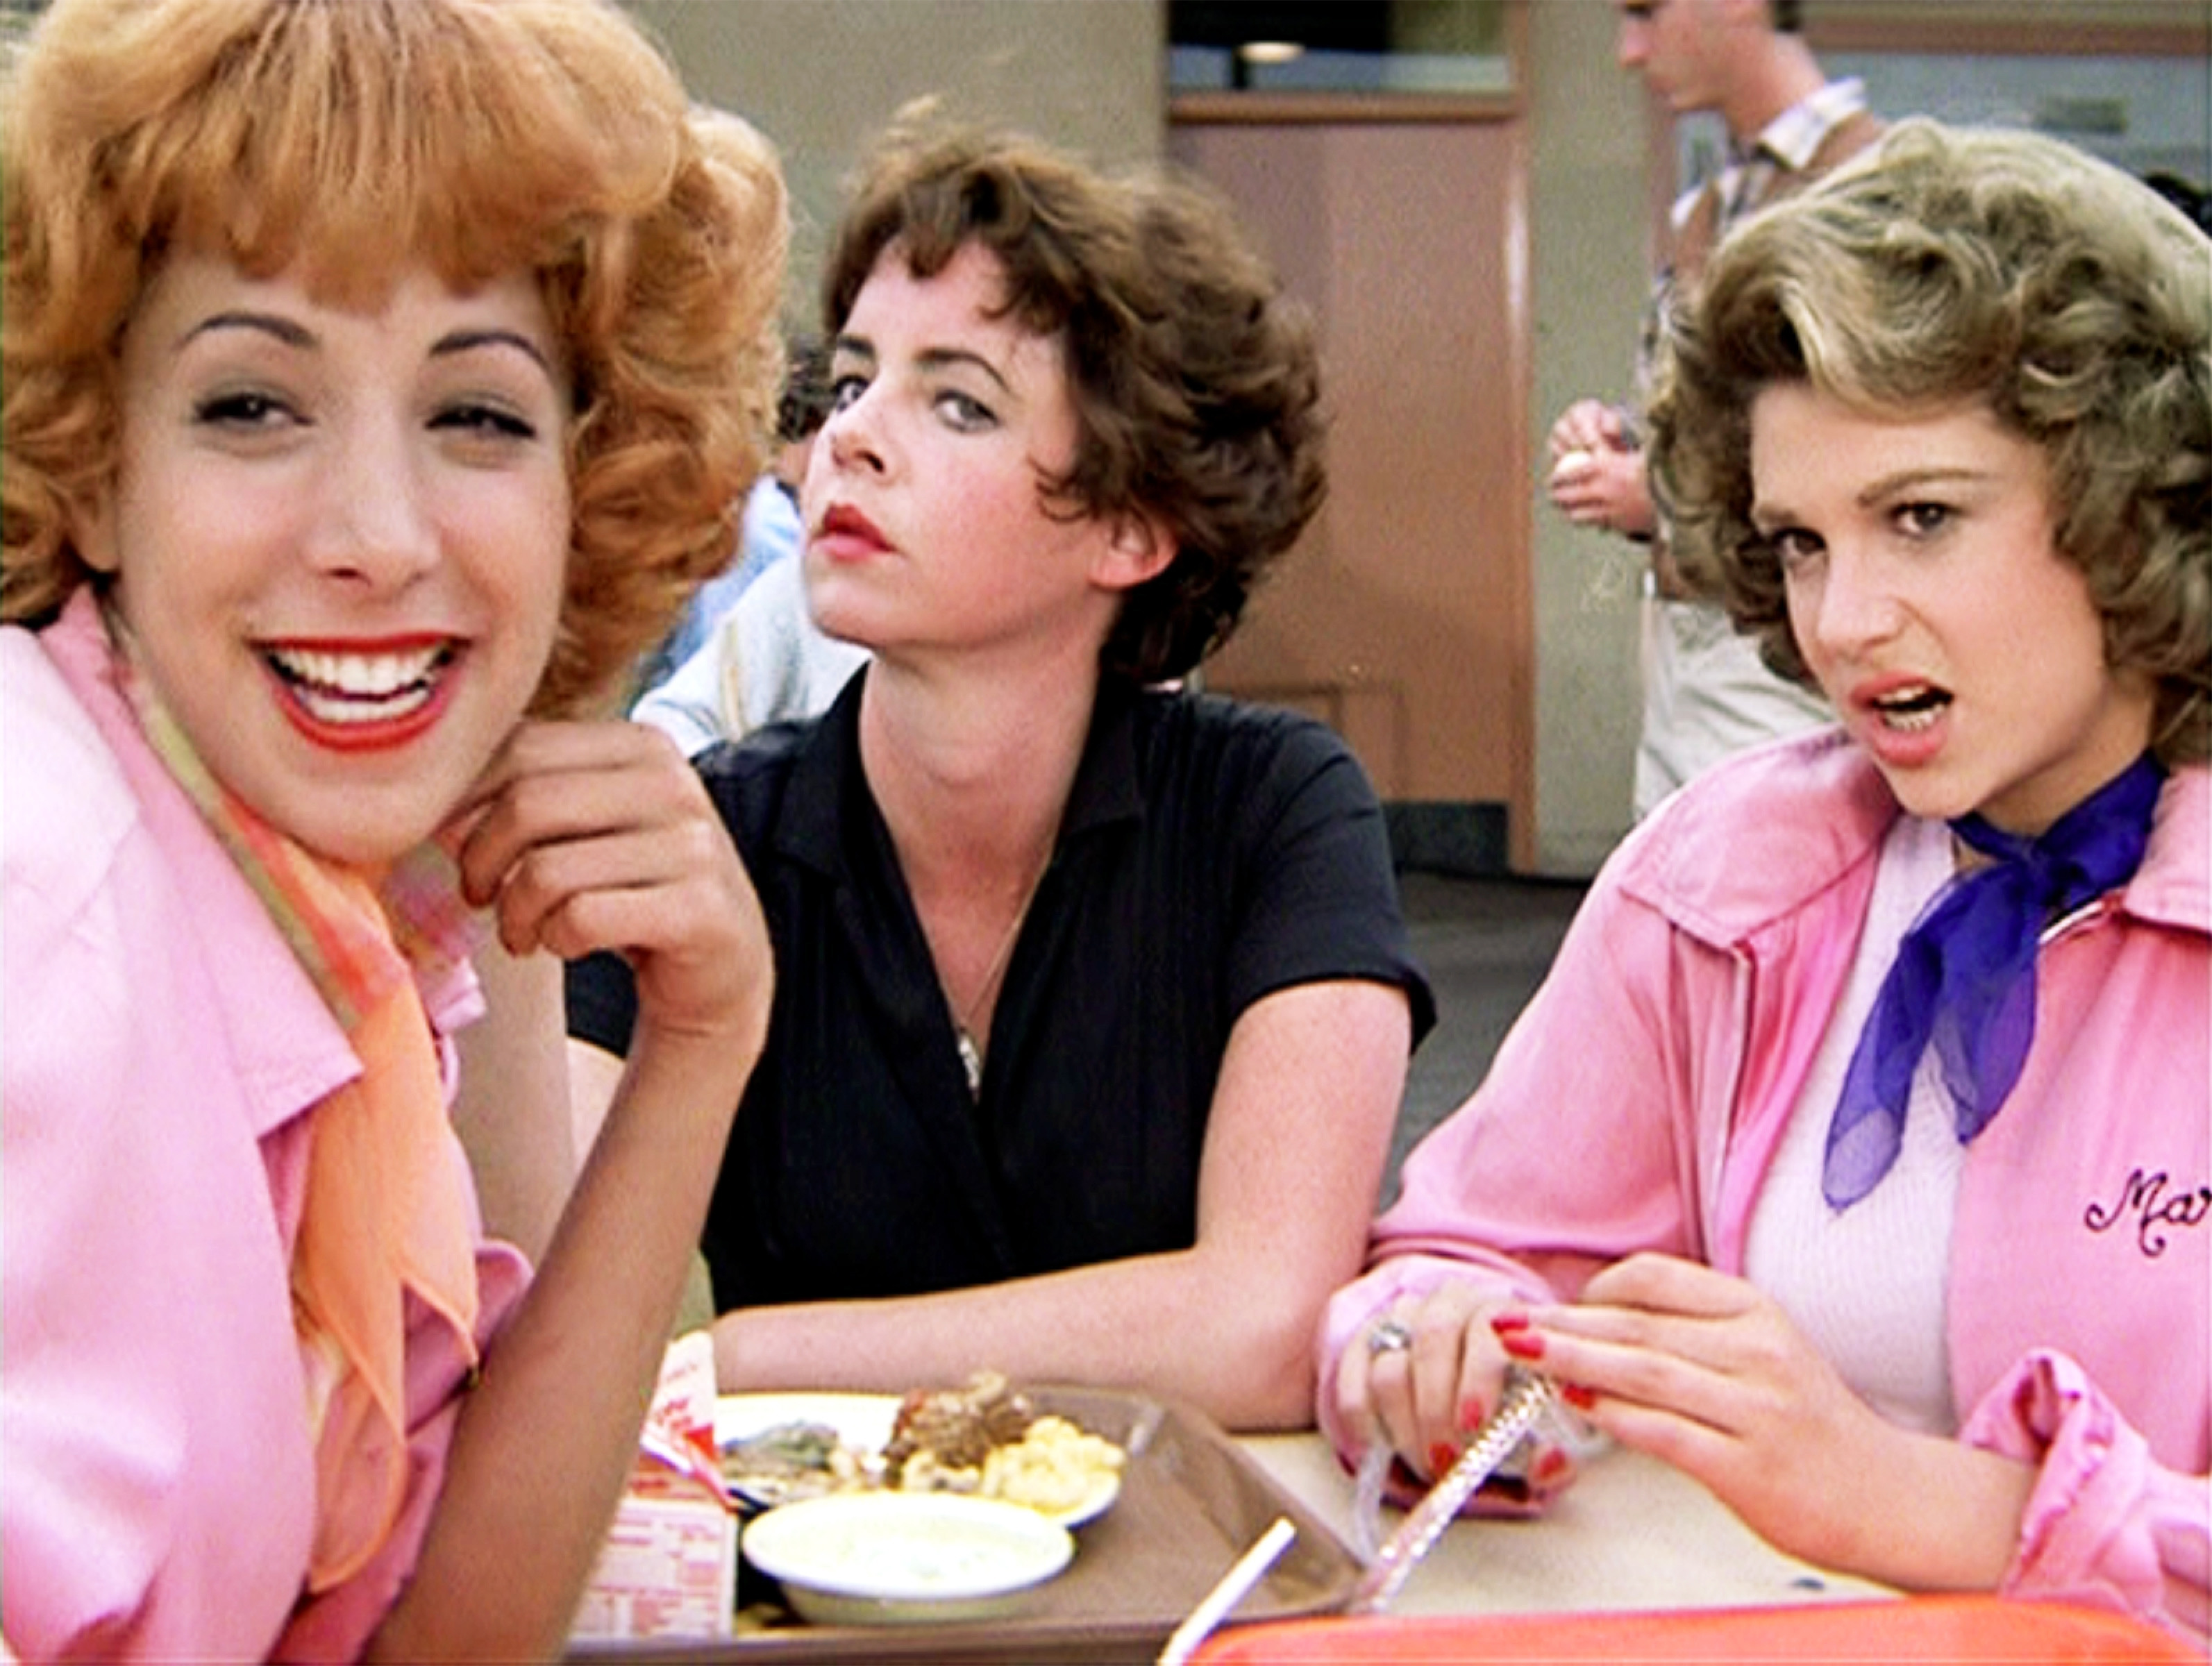 Didi Conn as Frenchy, Stockard Channing as Betty Rizzo, and Dinah Manoff as Marty Maraschino in "Grease" on June 16, 1978 | Source: Getty Images